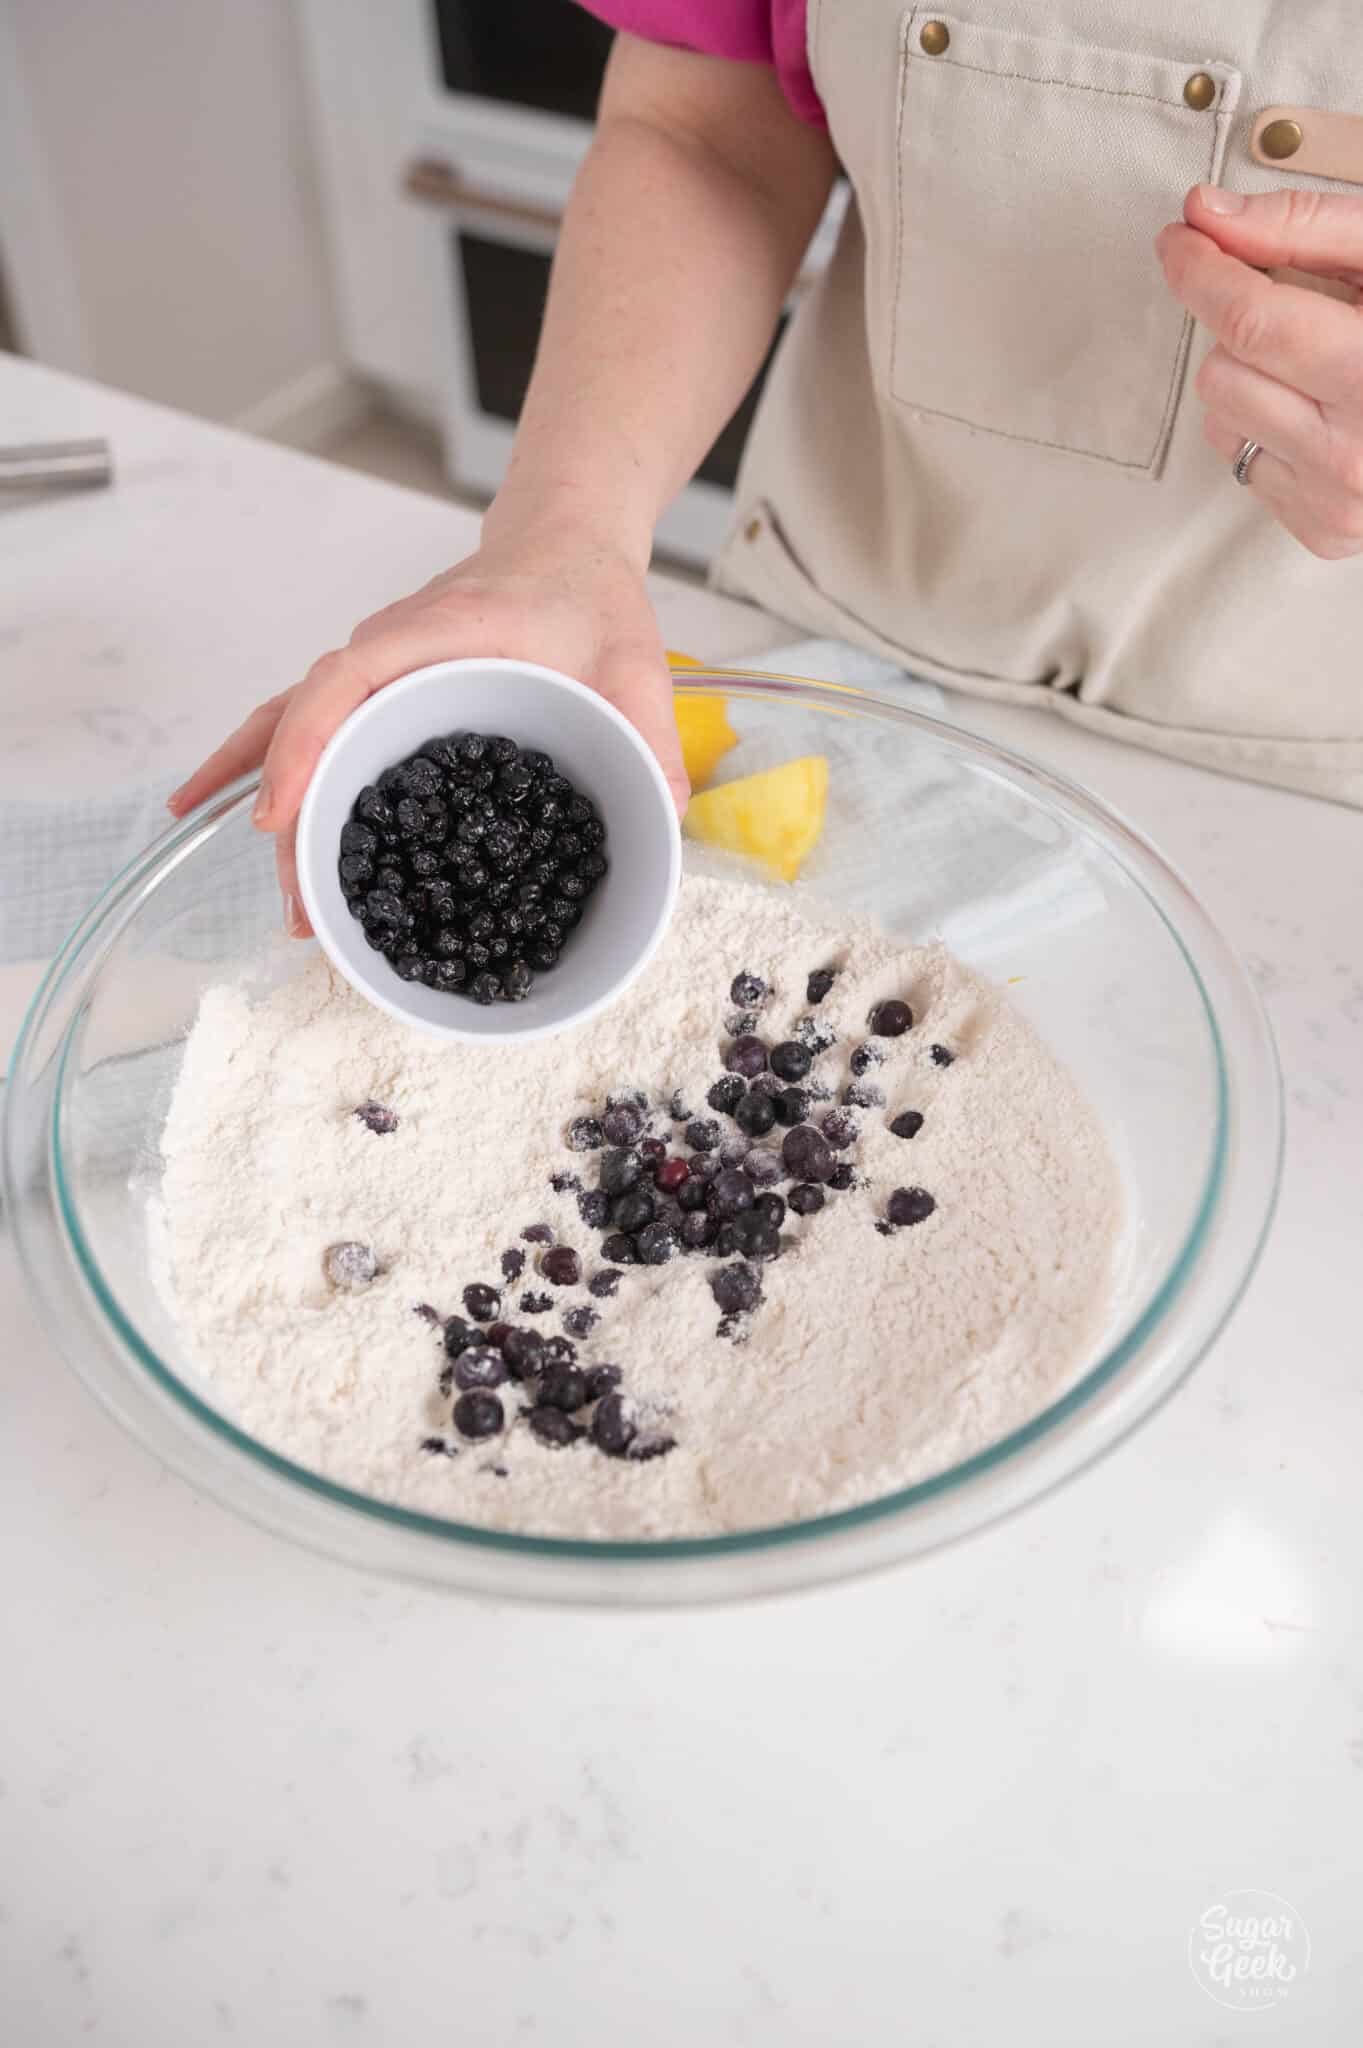 hand adding a cup of dried blueberries to a bowl of dry ingredients